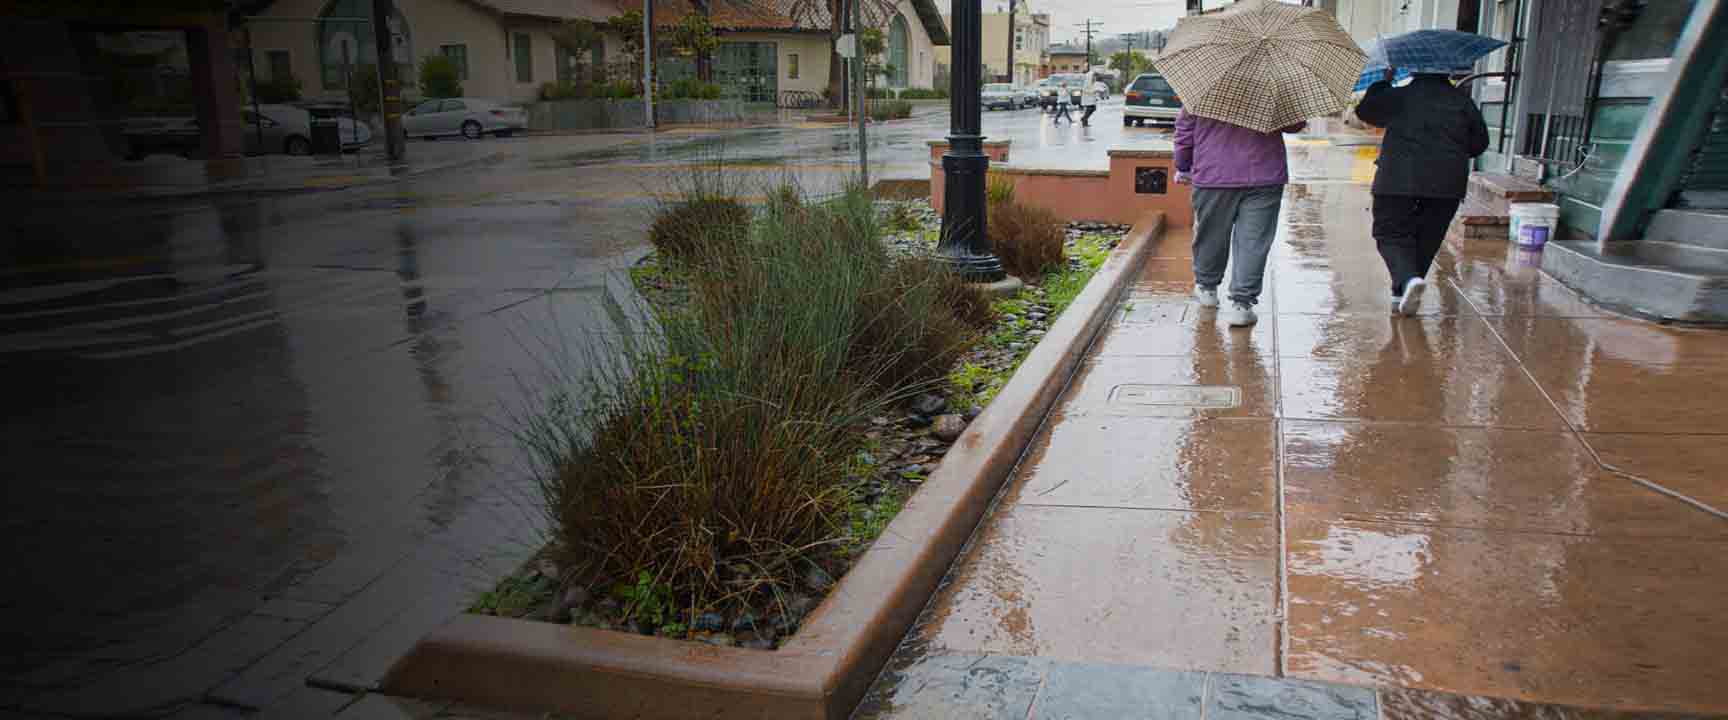 People walking in the rain next to a  side walk garden that works as a green infrastructure to help manage rainwater runoff.